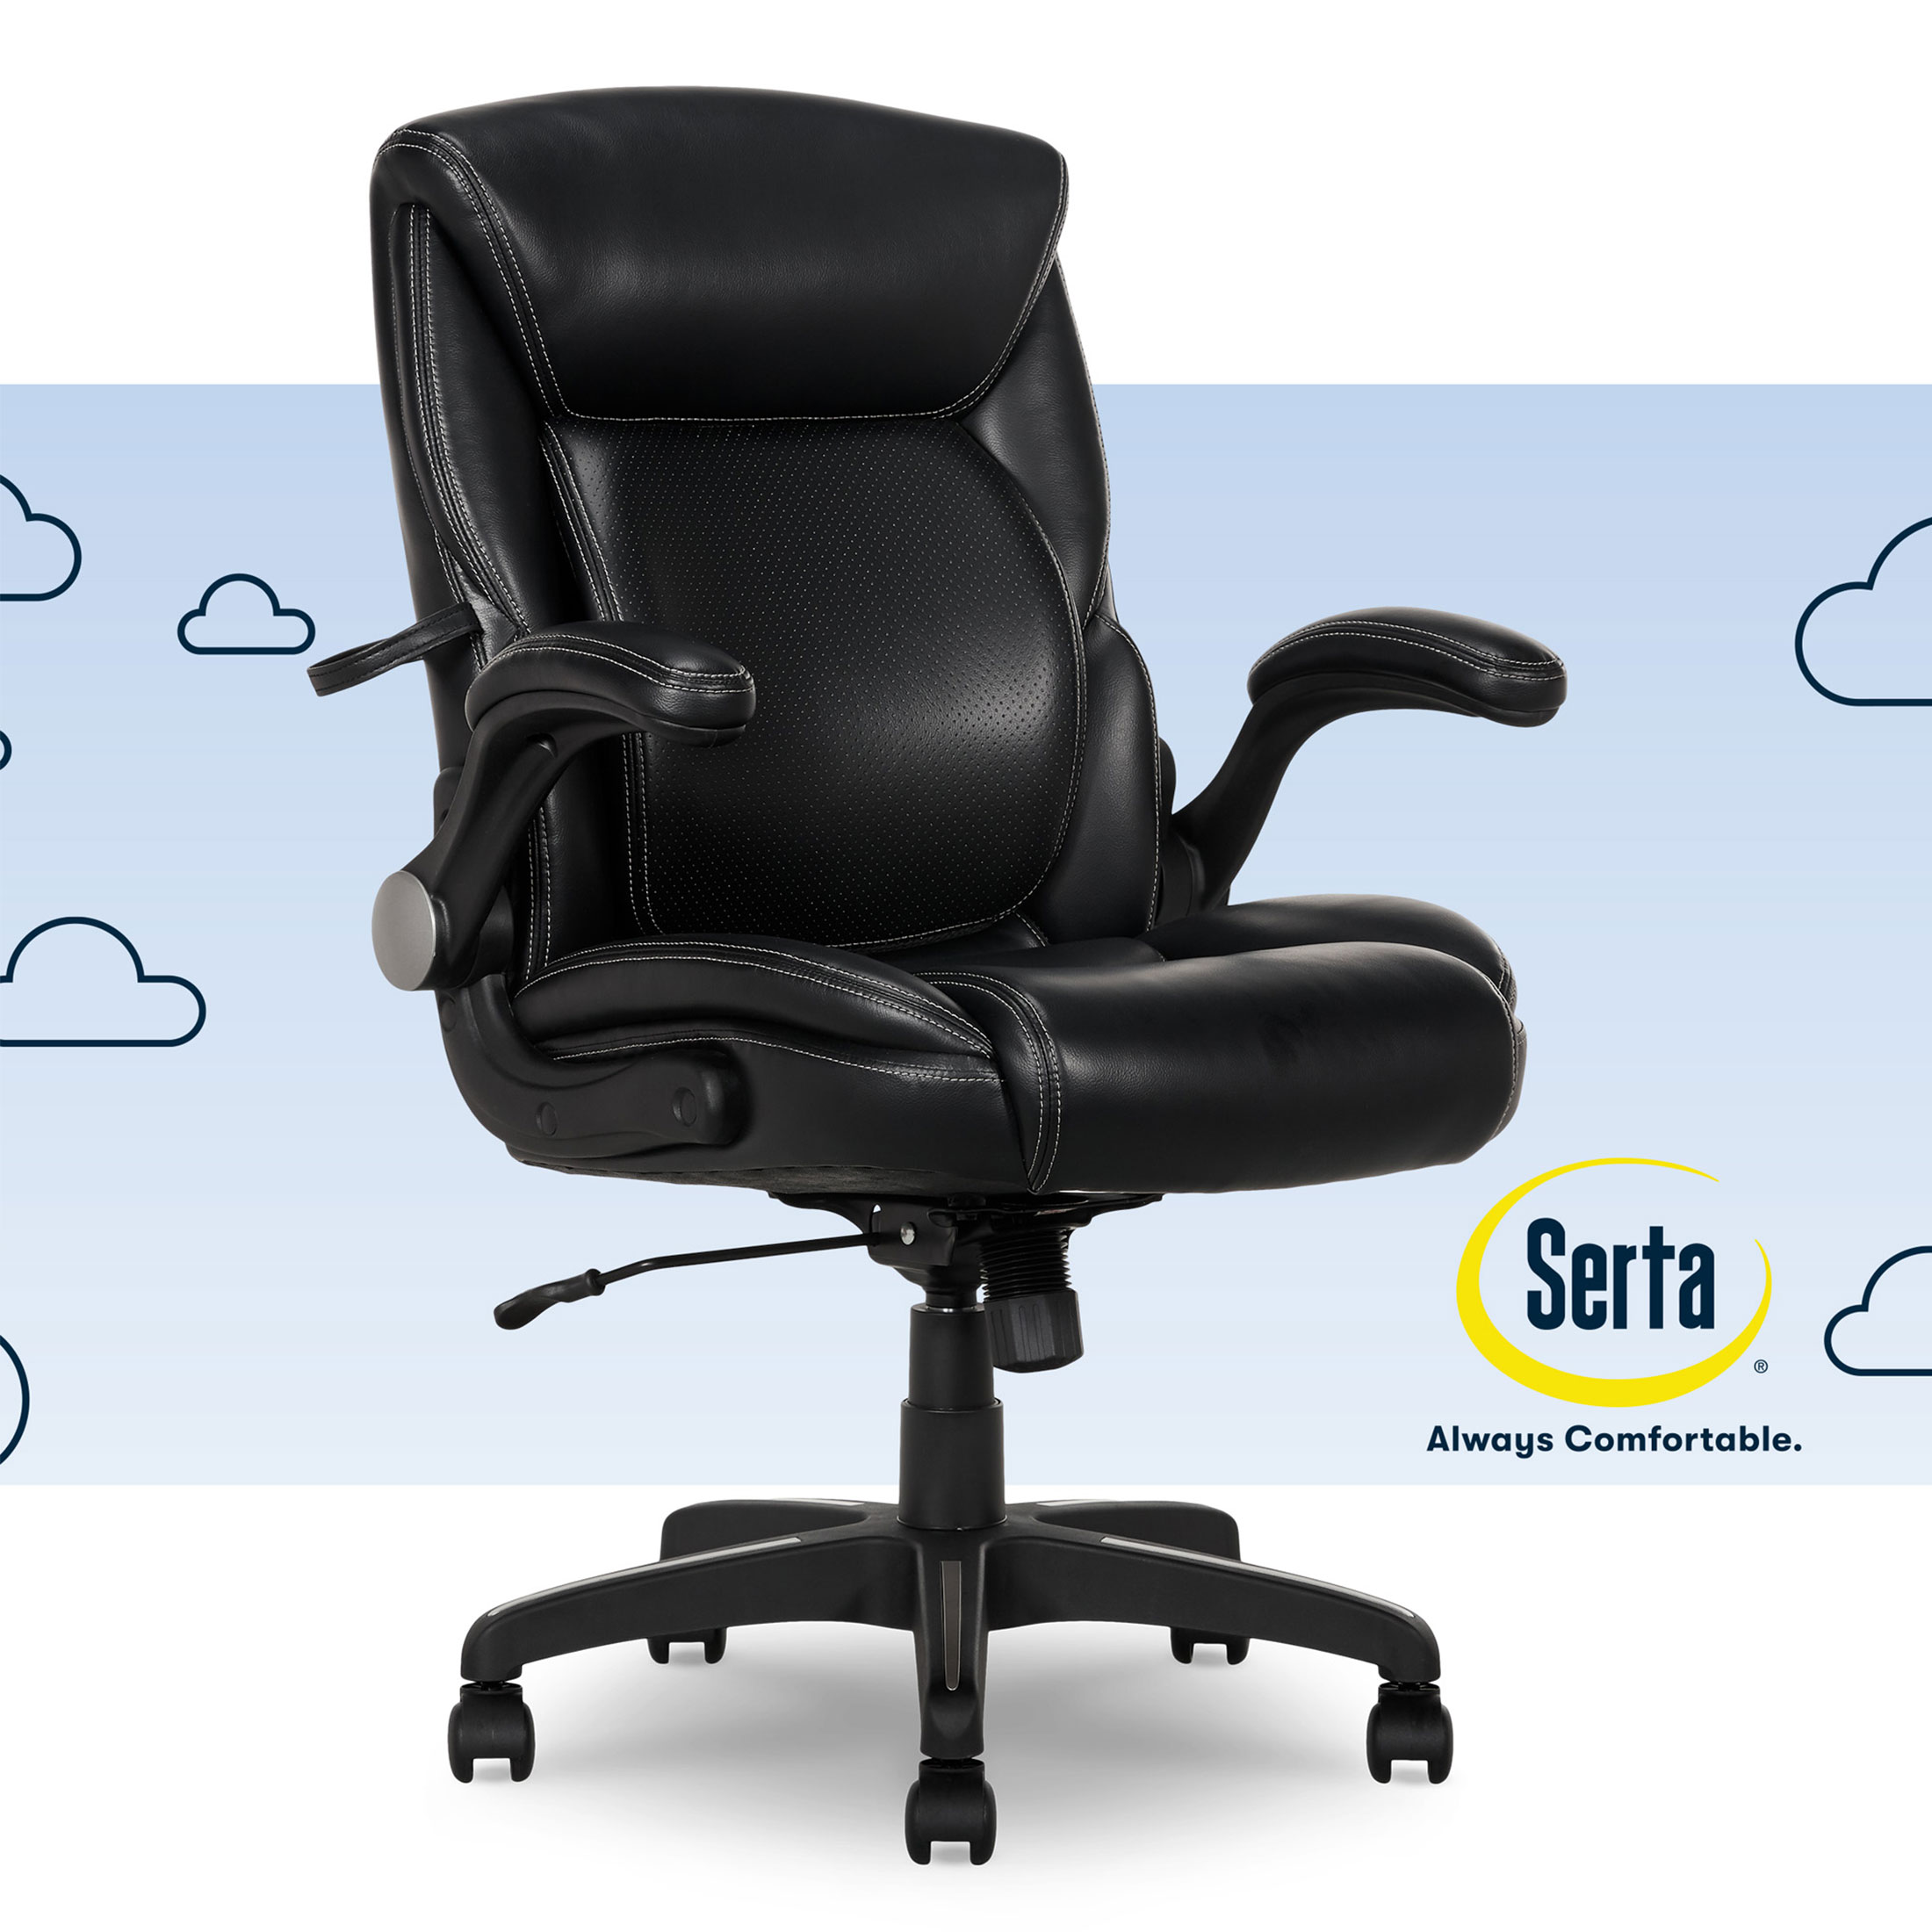 Serta Air Lumbar Bonded Leather Manager Office Chair, Black - image 1 of 15